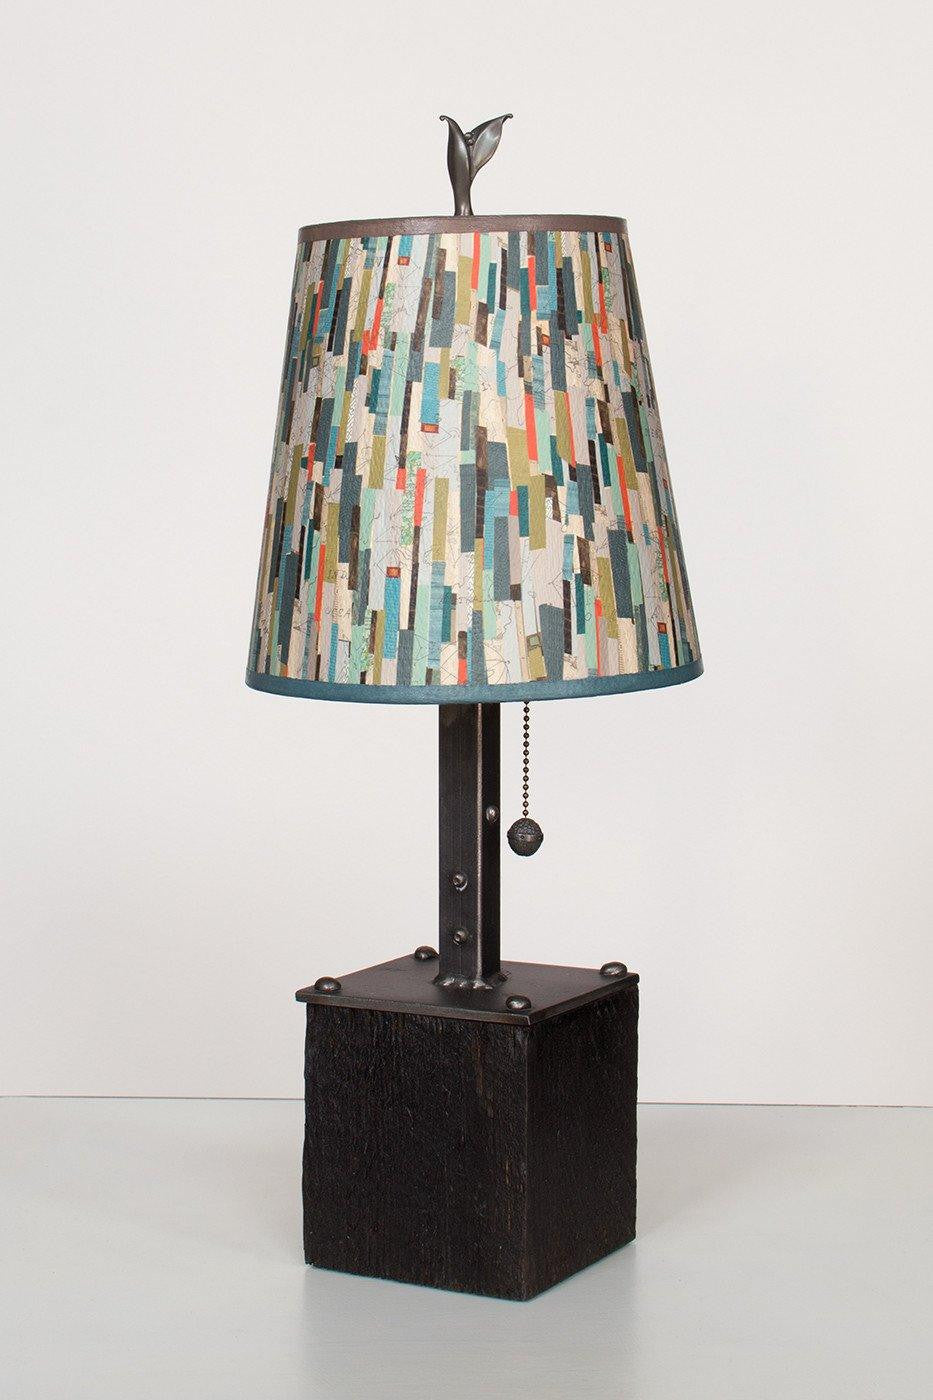 Janna Ugone &amp; Co Table Lamps Steel Table Lamp on Reclaimed Wood with Small Drum Shade in Papers